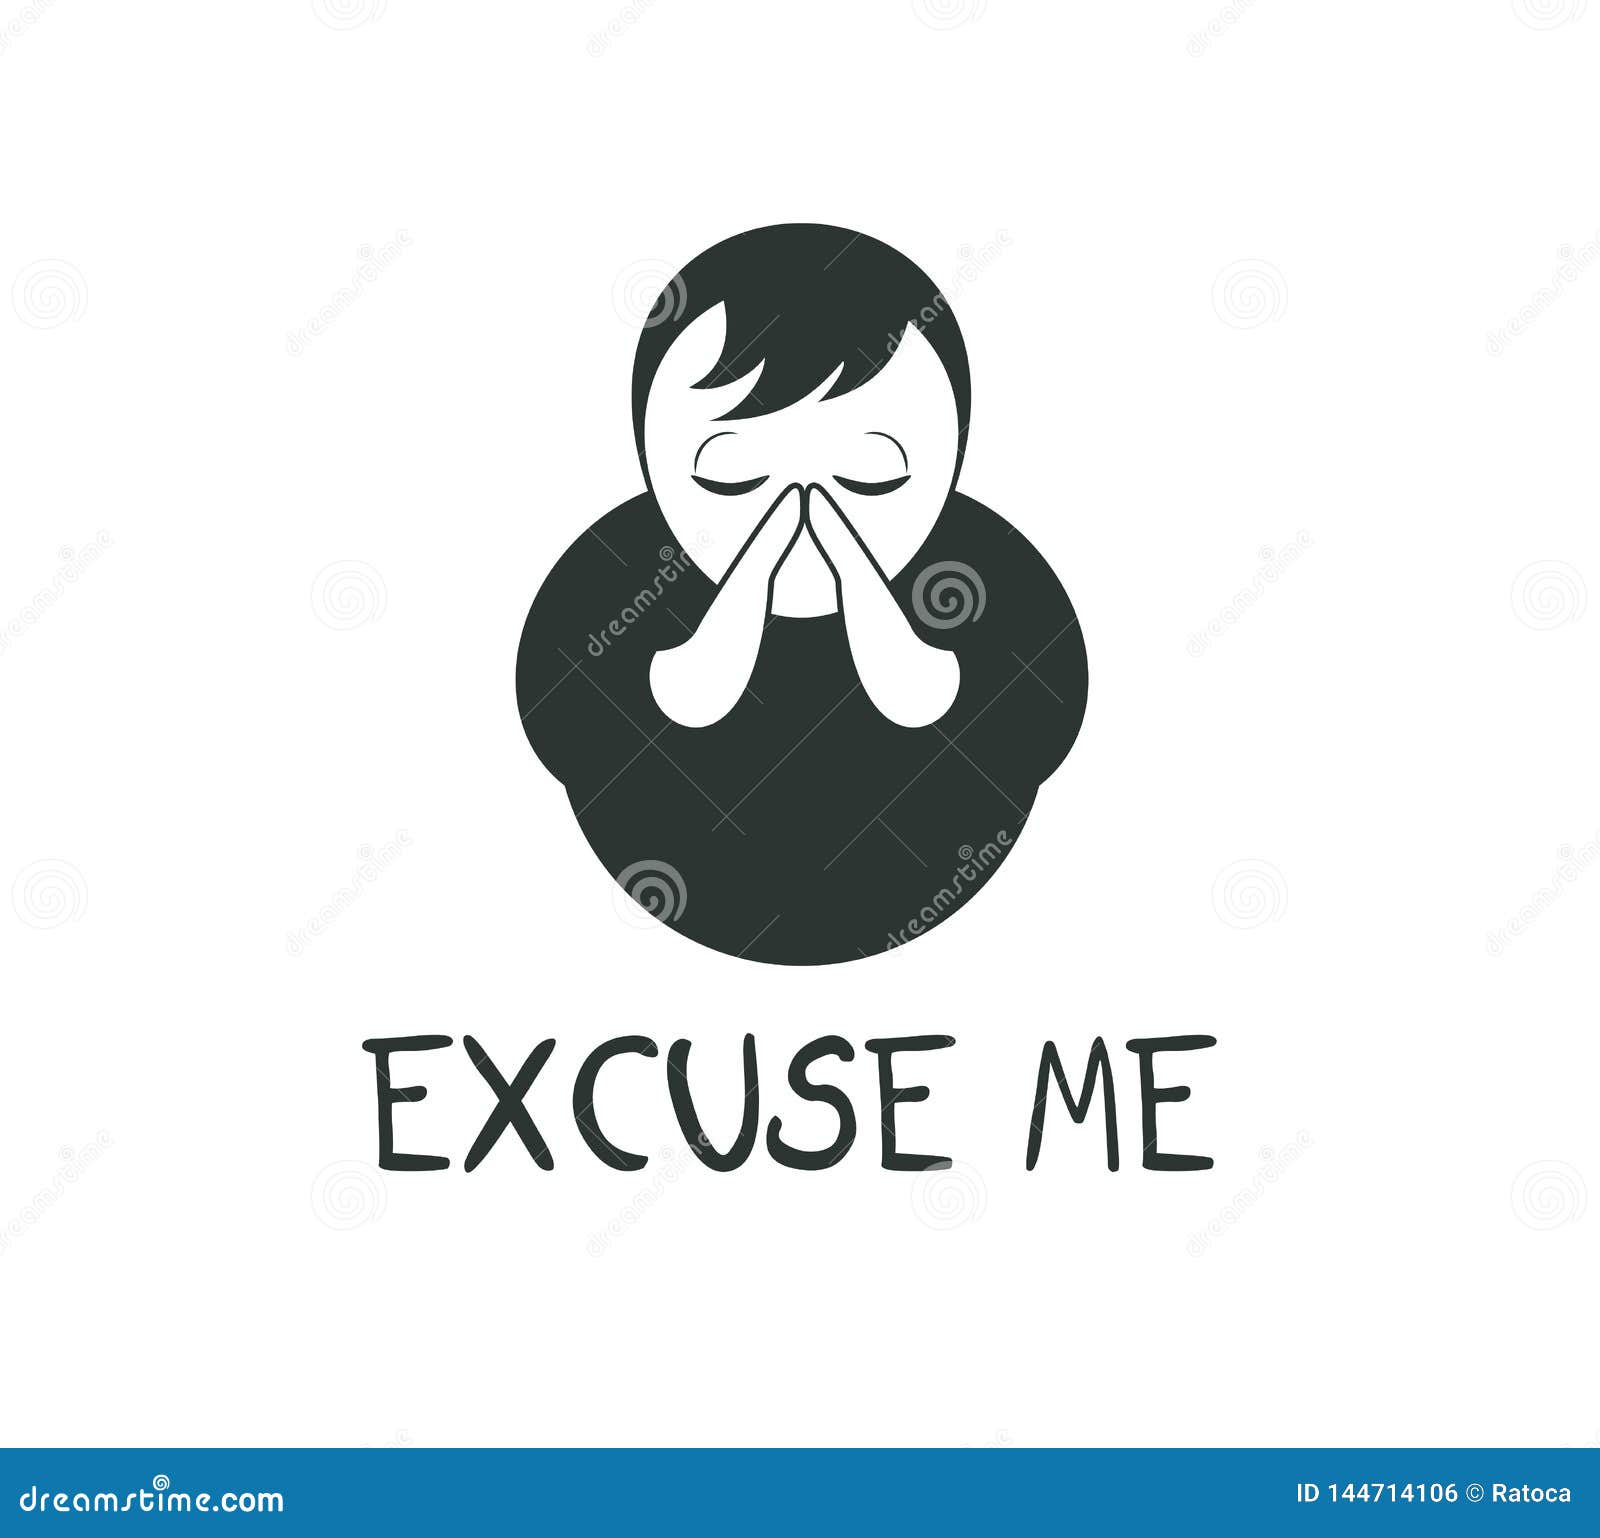 1,021 Excuse Me Images, Stock Photos, 3D objects, & Vectors | Shutterstock